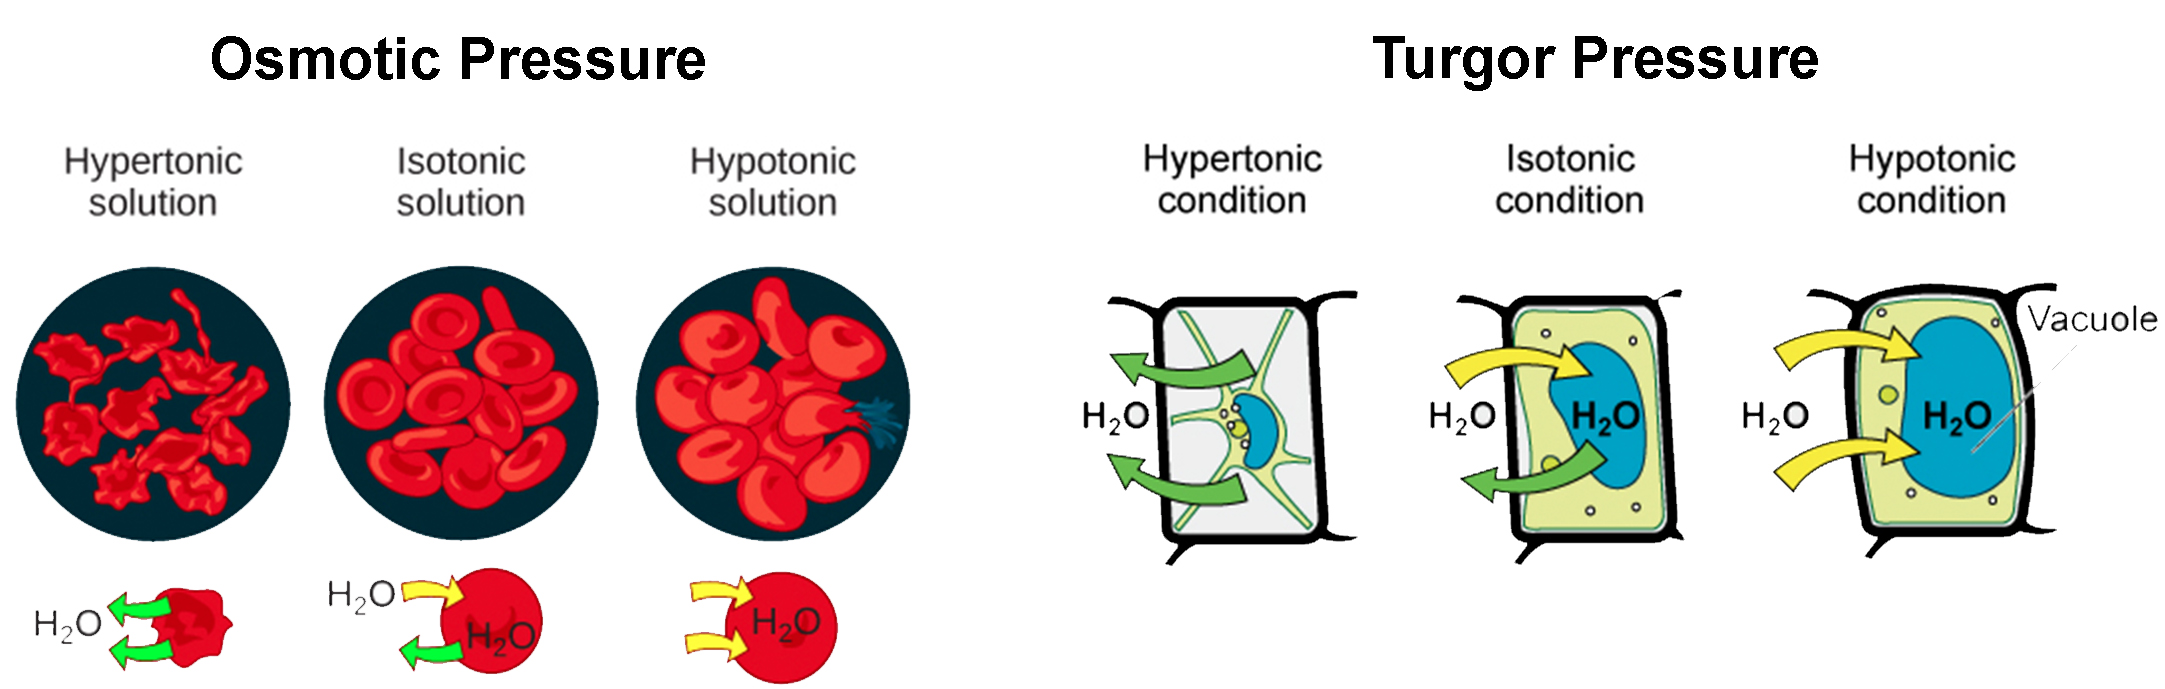 Part a: osmotic pressure. The left part of this illustration shows shriveled red blood cells bathed in a hypertonic solution. The middle part shows healthy red blood cells bathed in an isotonic solution, and the right part shows bloated red blood cells bathed in a hypotonic solution. Part b: turgor pressure. The left part of this image shows a plant cell bathed in a hypertonic solution so that the plasma membrane has pulled away completely from the cell wall, and the central vacuole has shrunk. The middle part shows a plant cell bathed in an isotonic solution; the plasma membrane has pulled away from the cell wall a bit, and the central vacuole has shrunk. The right part shows a plant cell in a hypotonic solution. The central vacuole is large, and the plasma membrane is pressed against the cell wall.